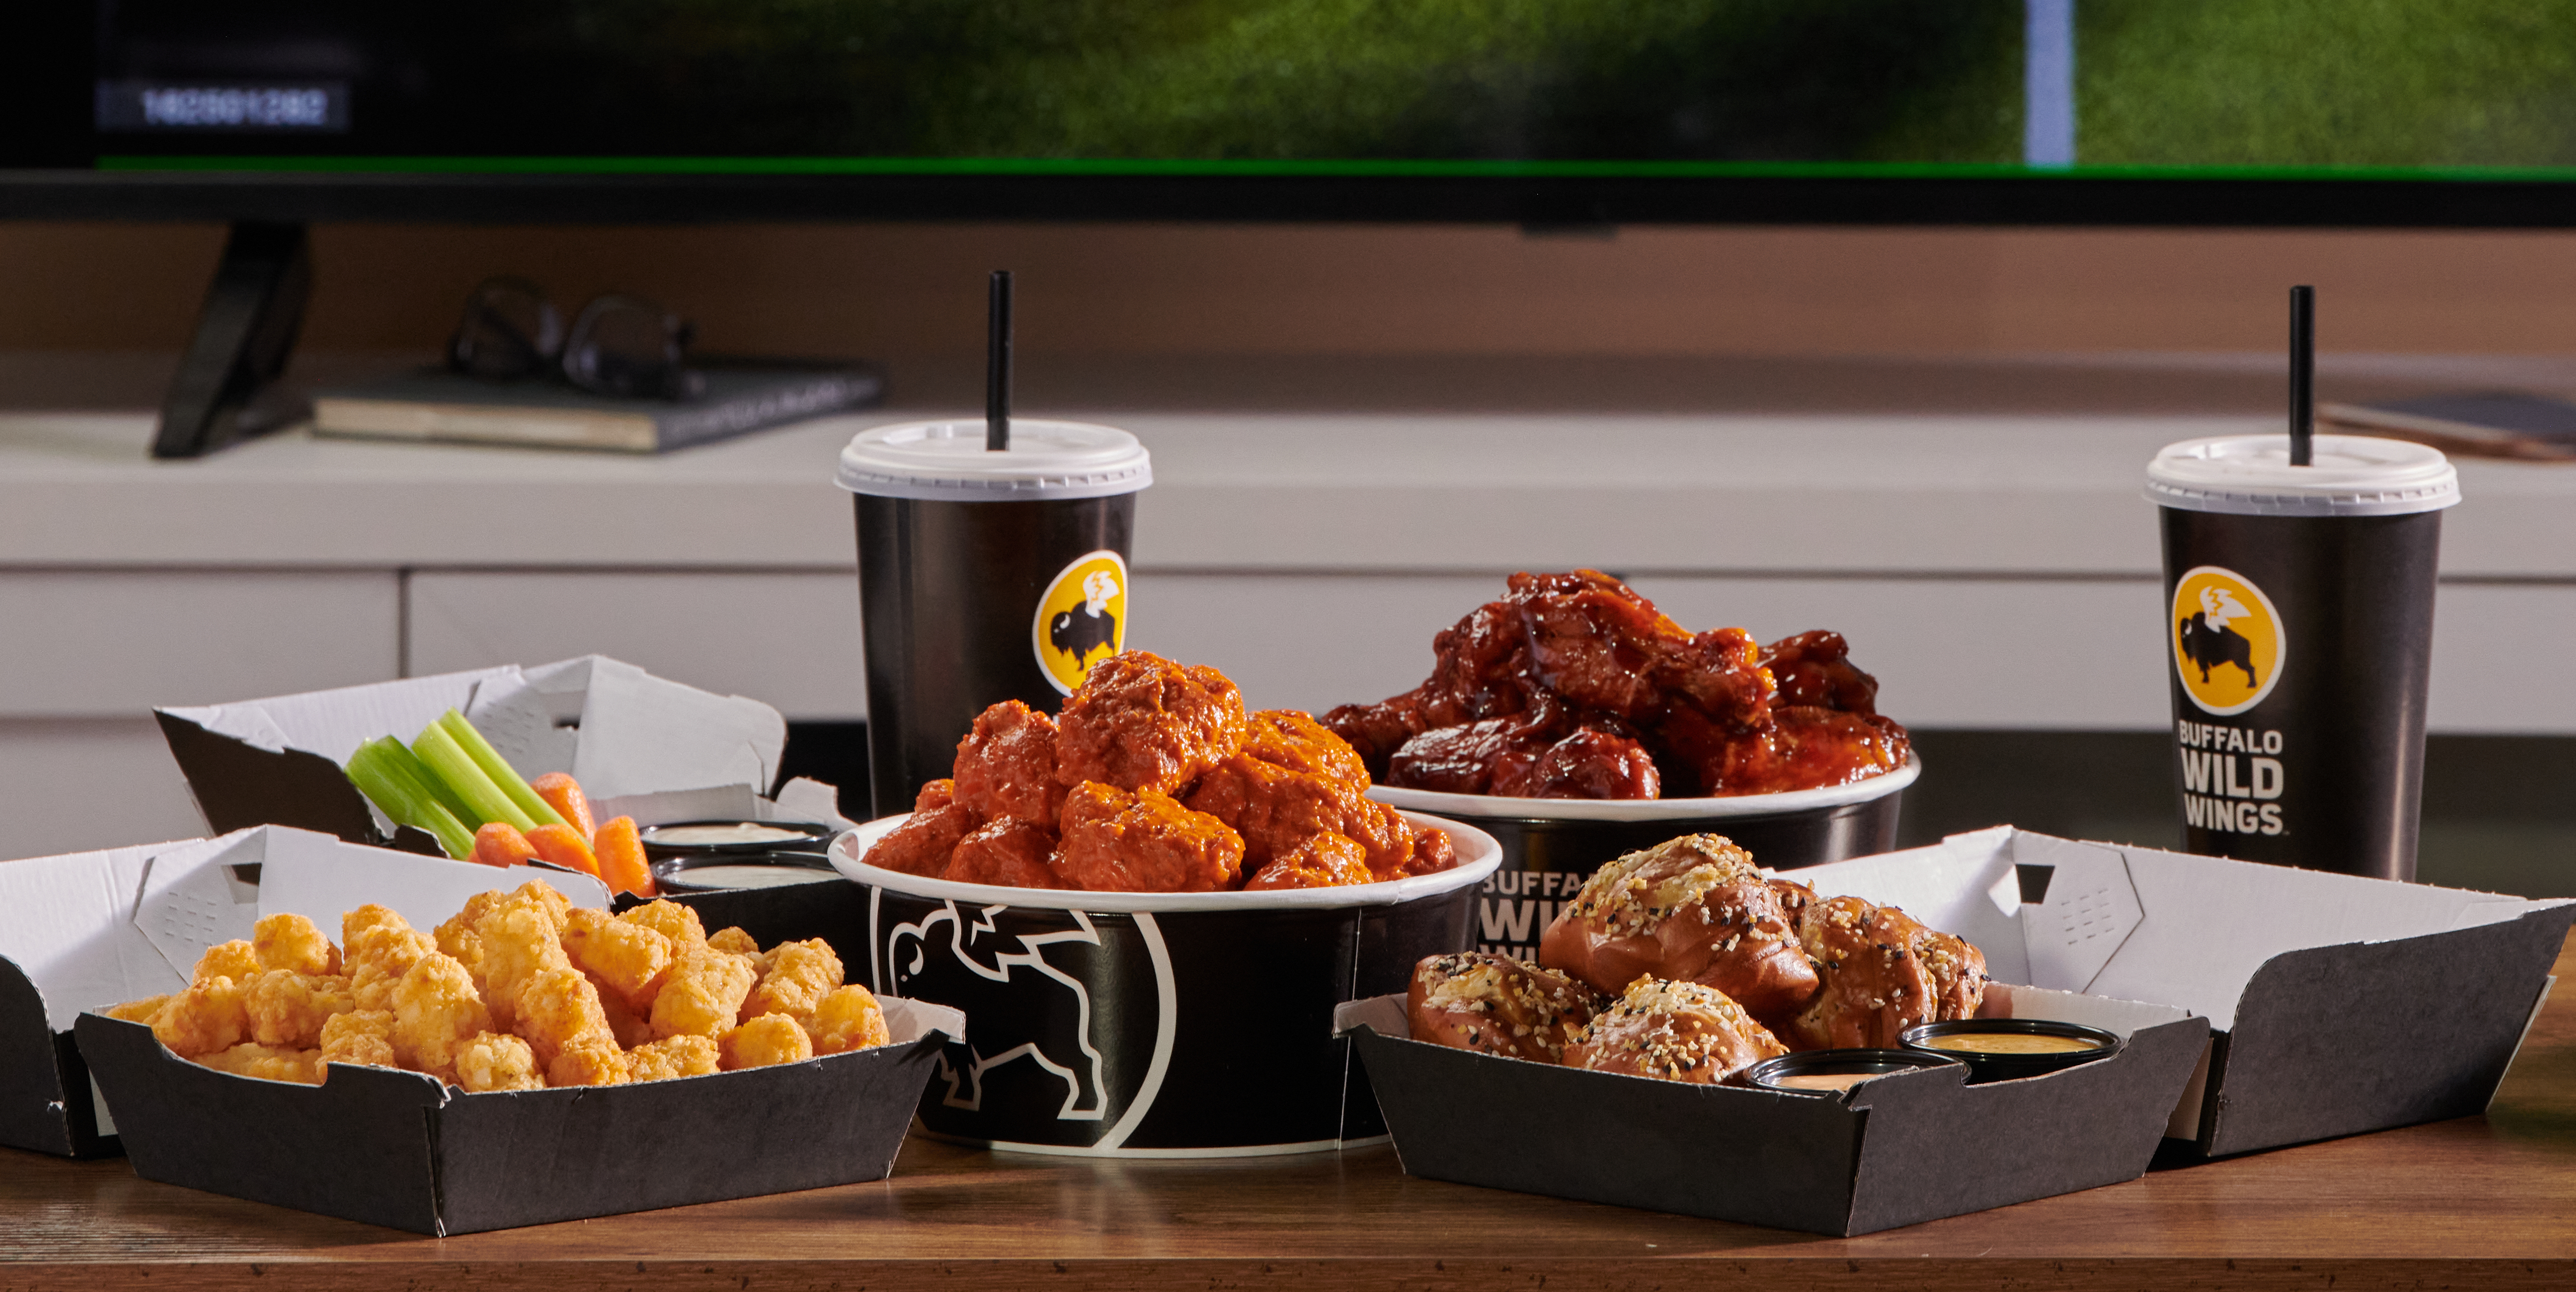 Buffalo Wild Wings - Who's ready for playoff football!?